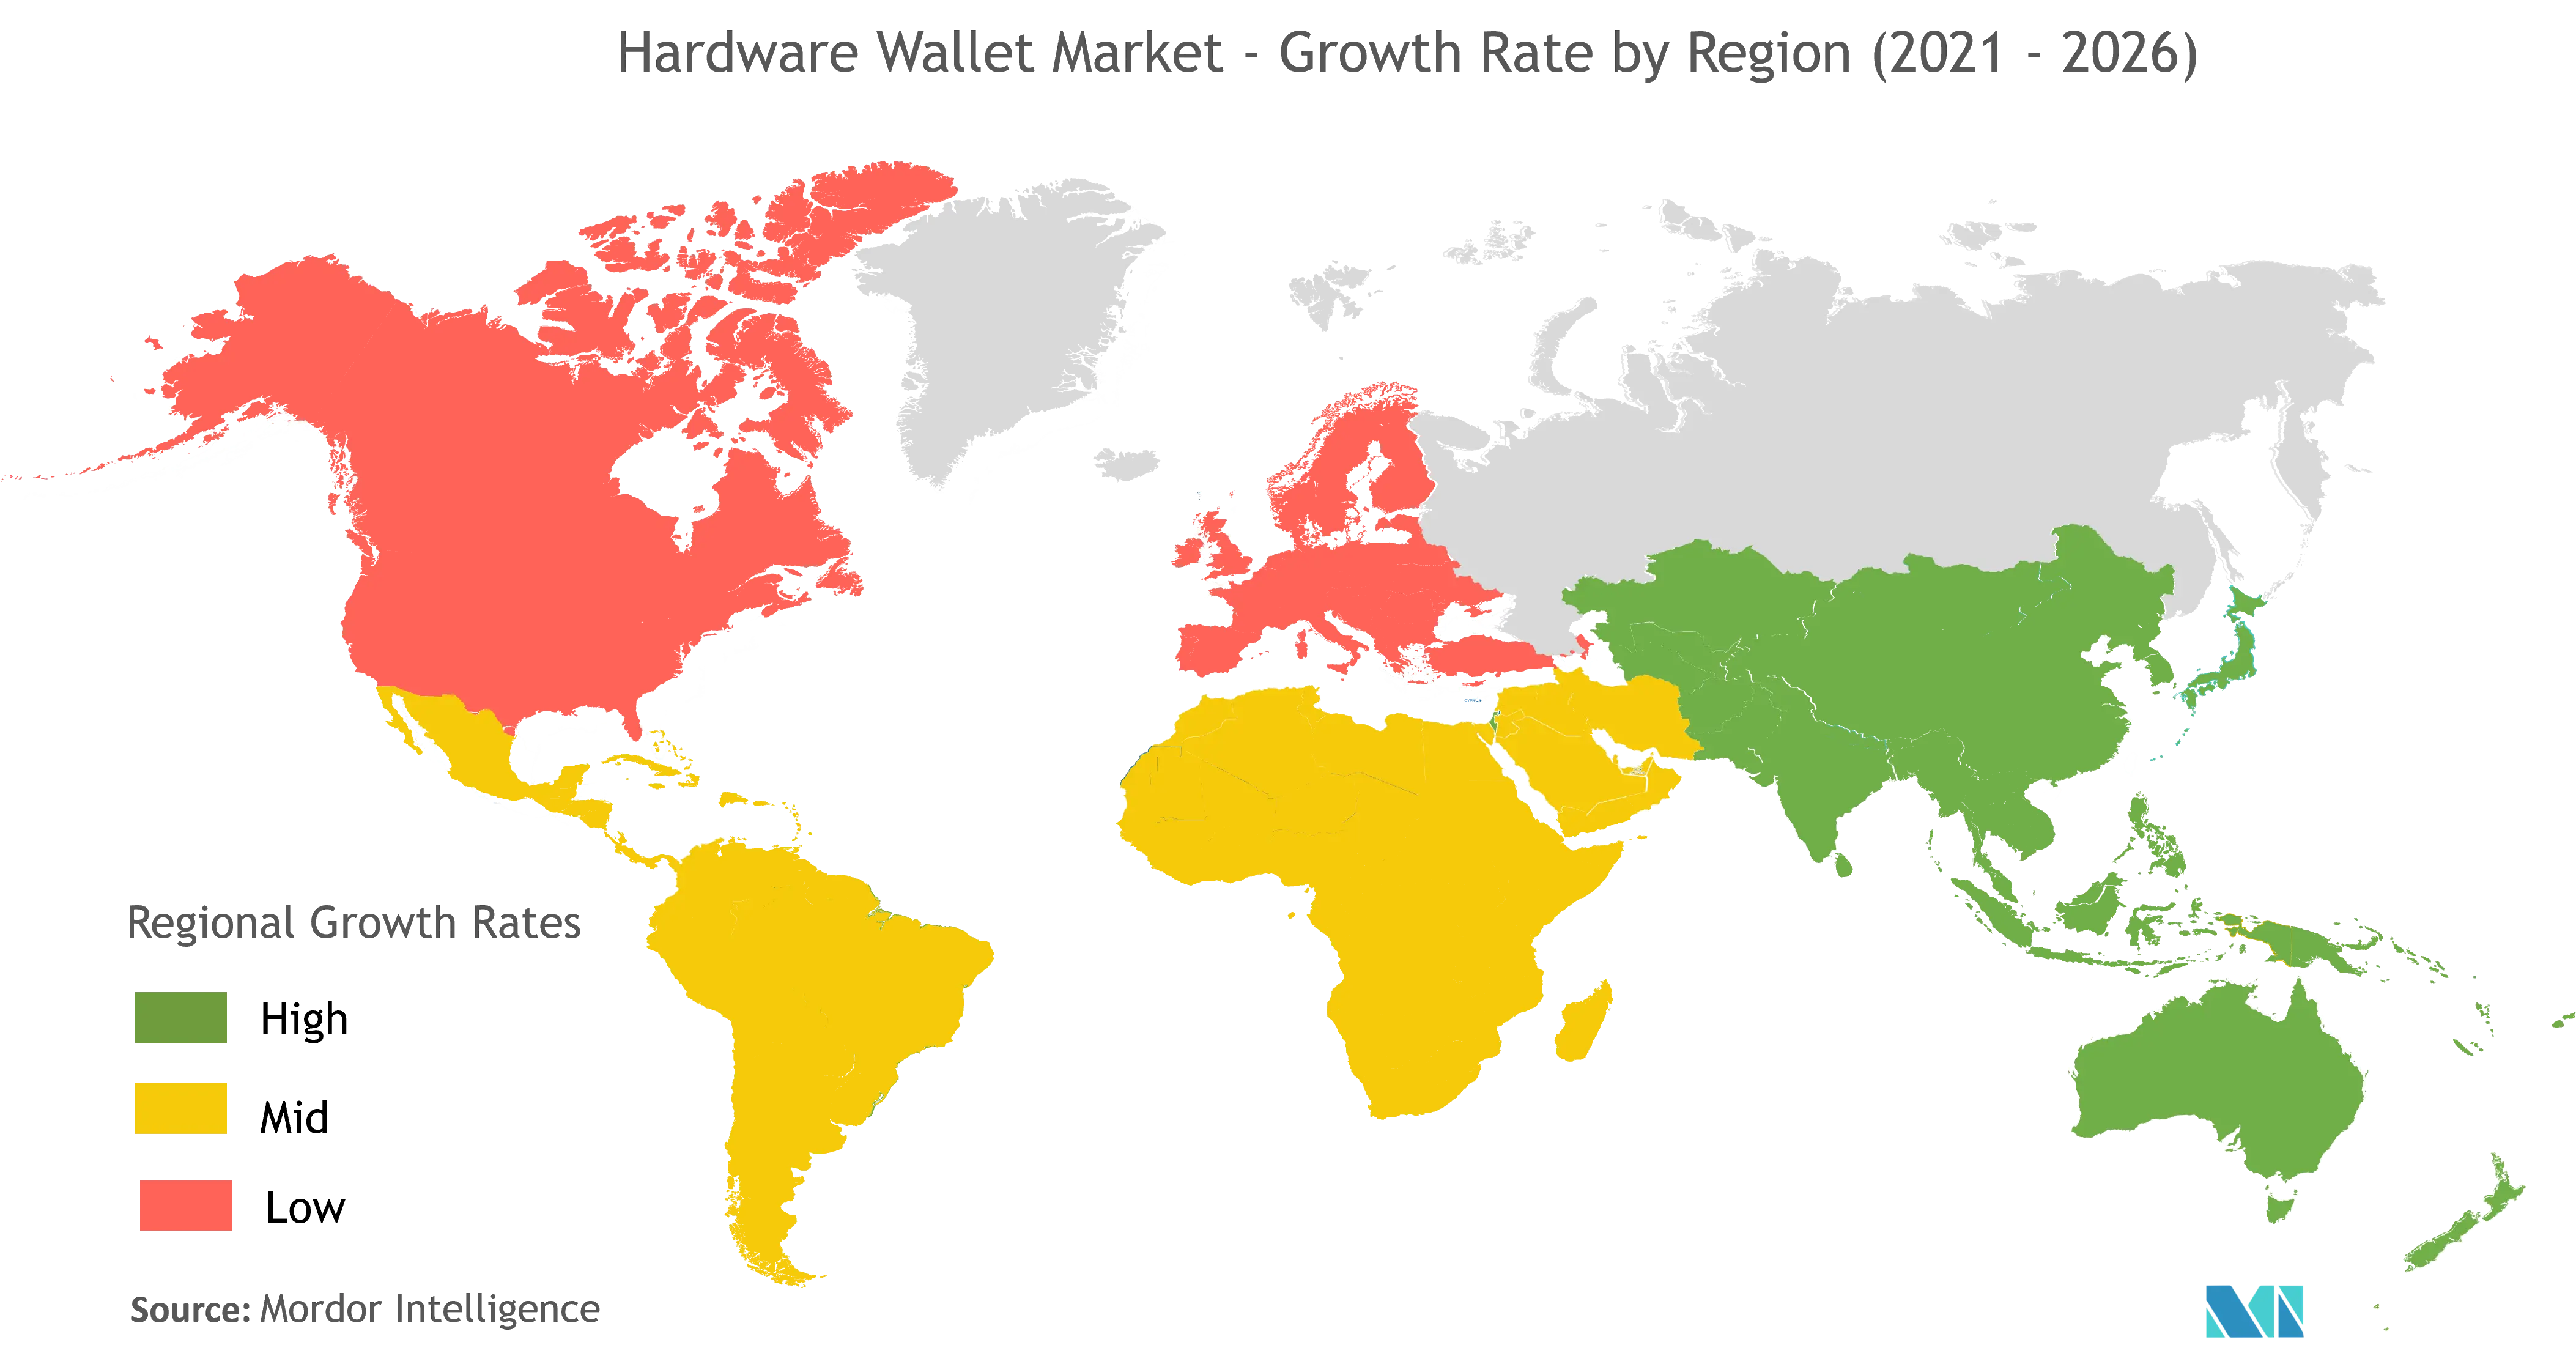 Hardware Wallet Market Growth Rate